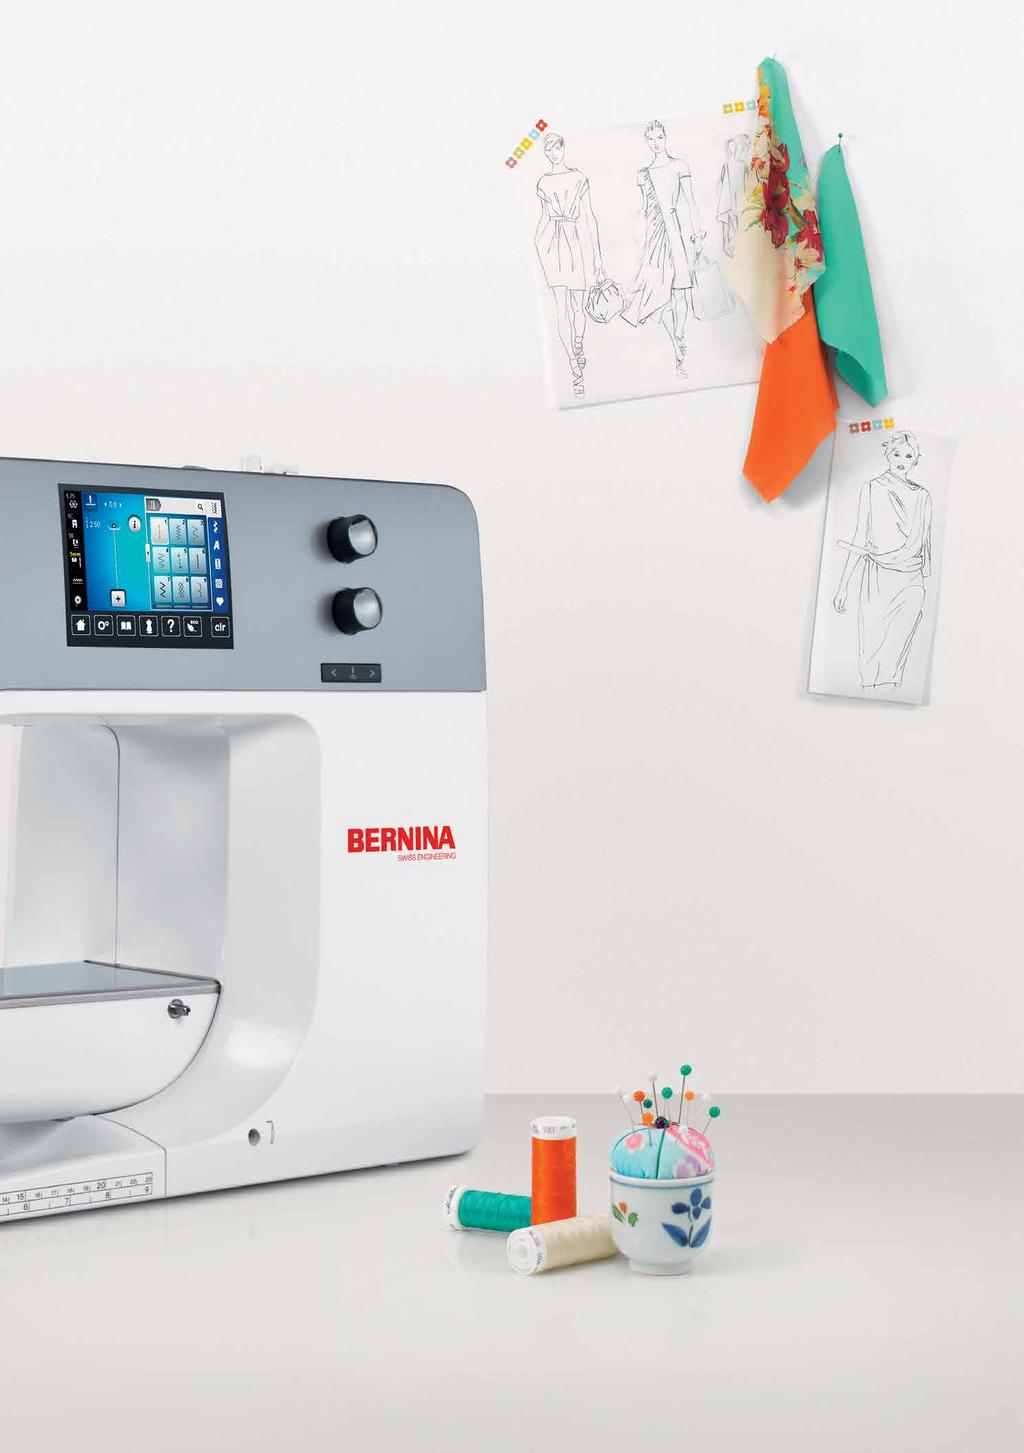 Easy navigation on a centrally located colour touch screen BERNINA